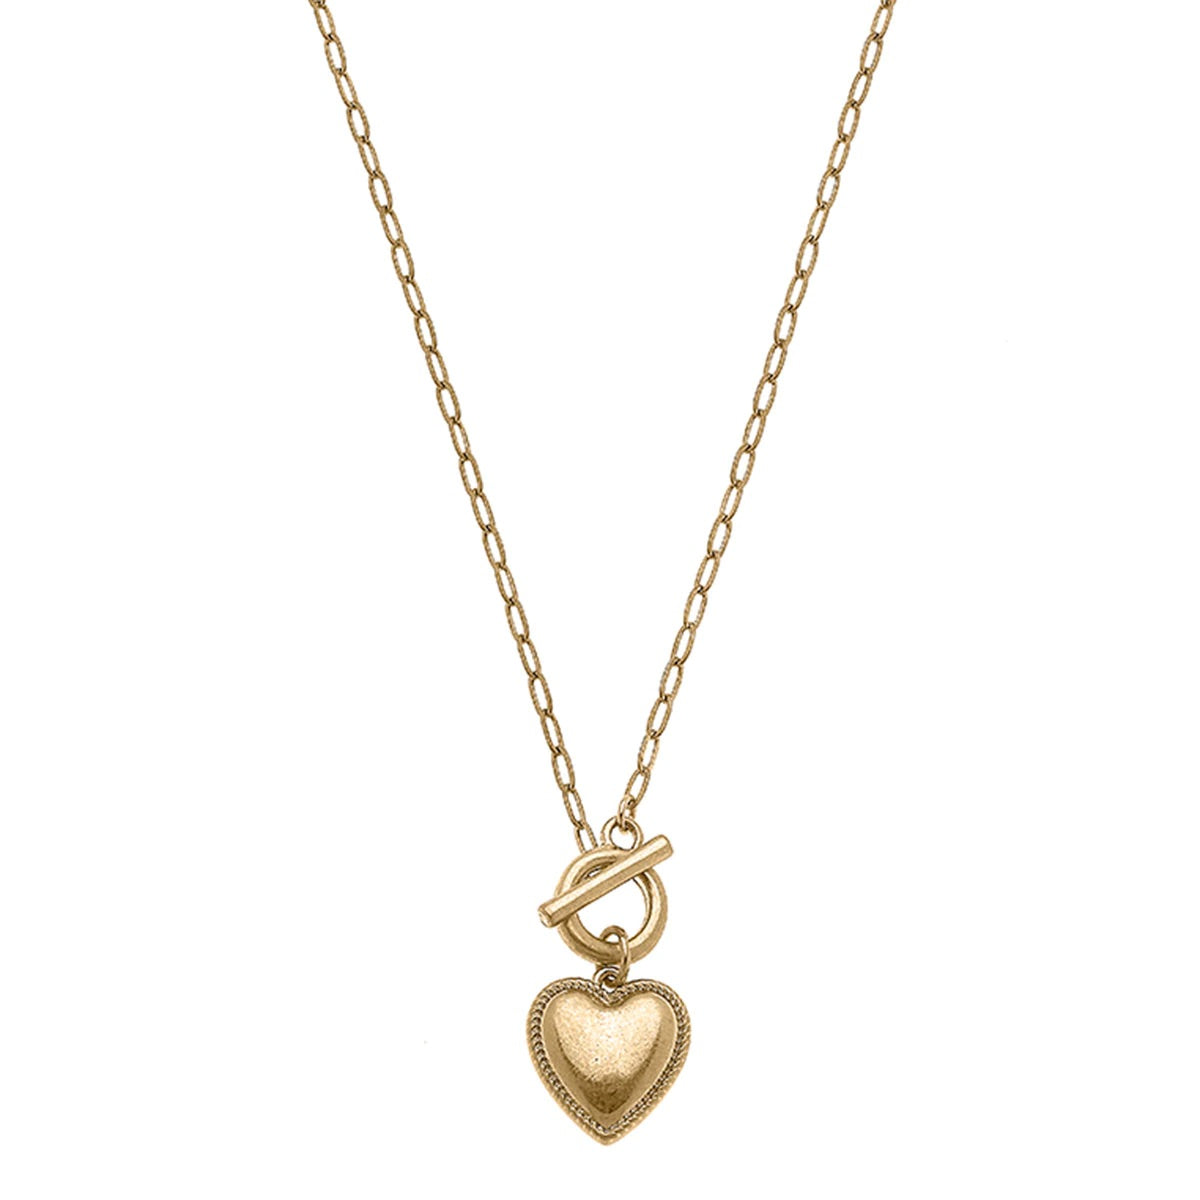 Necklaces- Canvas Edie Puffed Heart Pendant Necklace in Worn Gold